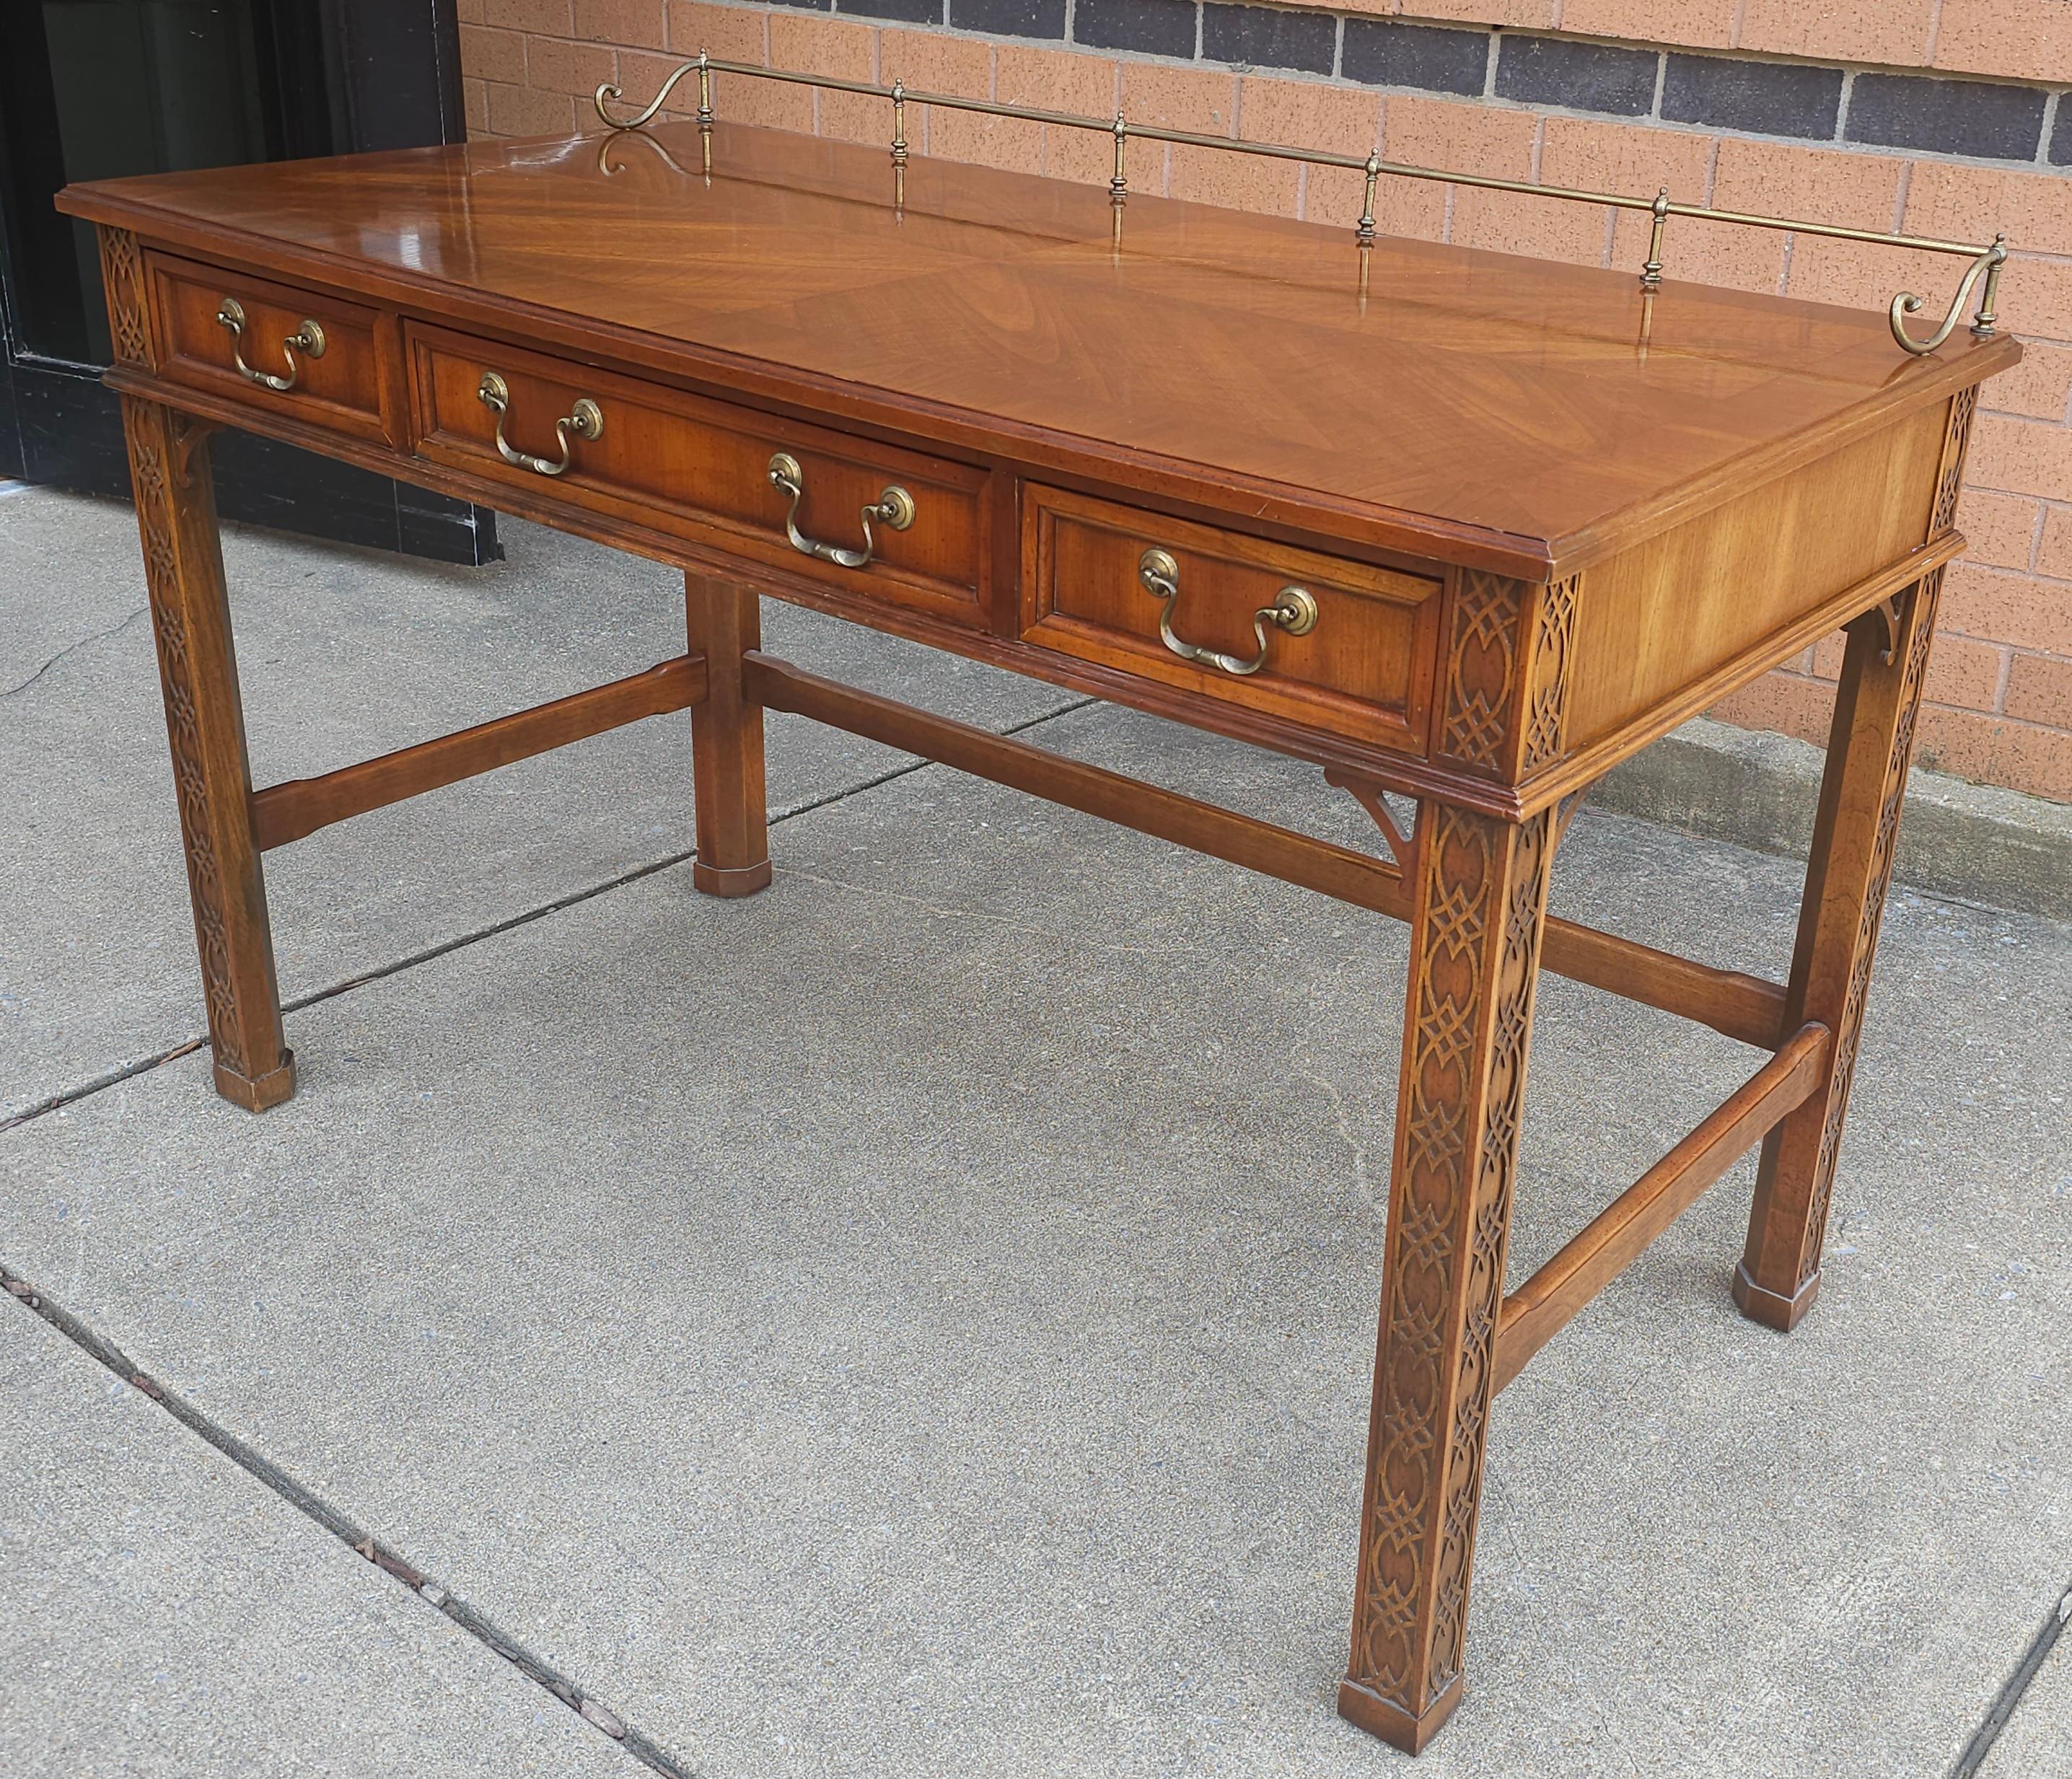 20th Century George III Style Blind Fretwork Mahogany Table Desk w/ Gallery For Sale